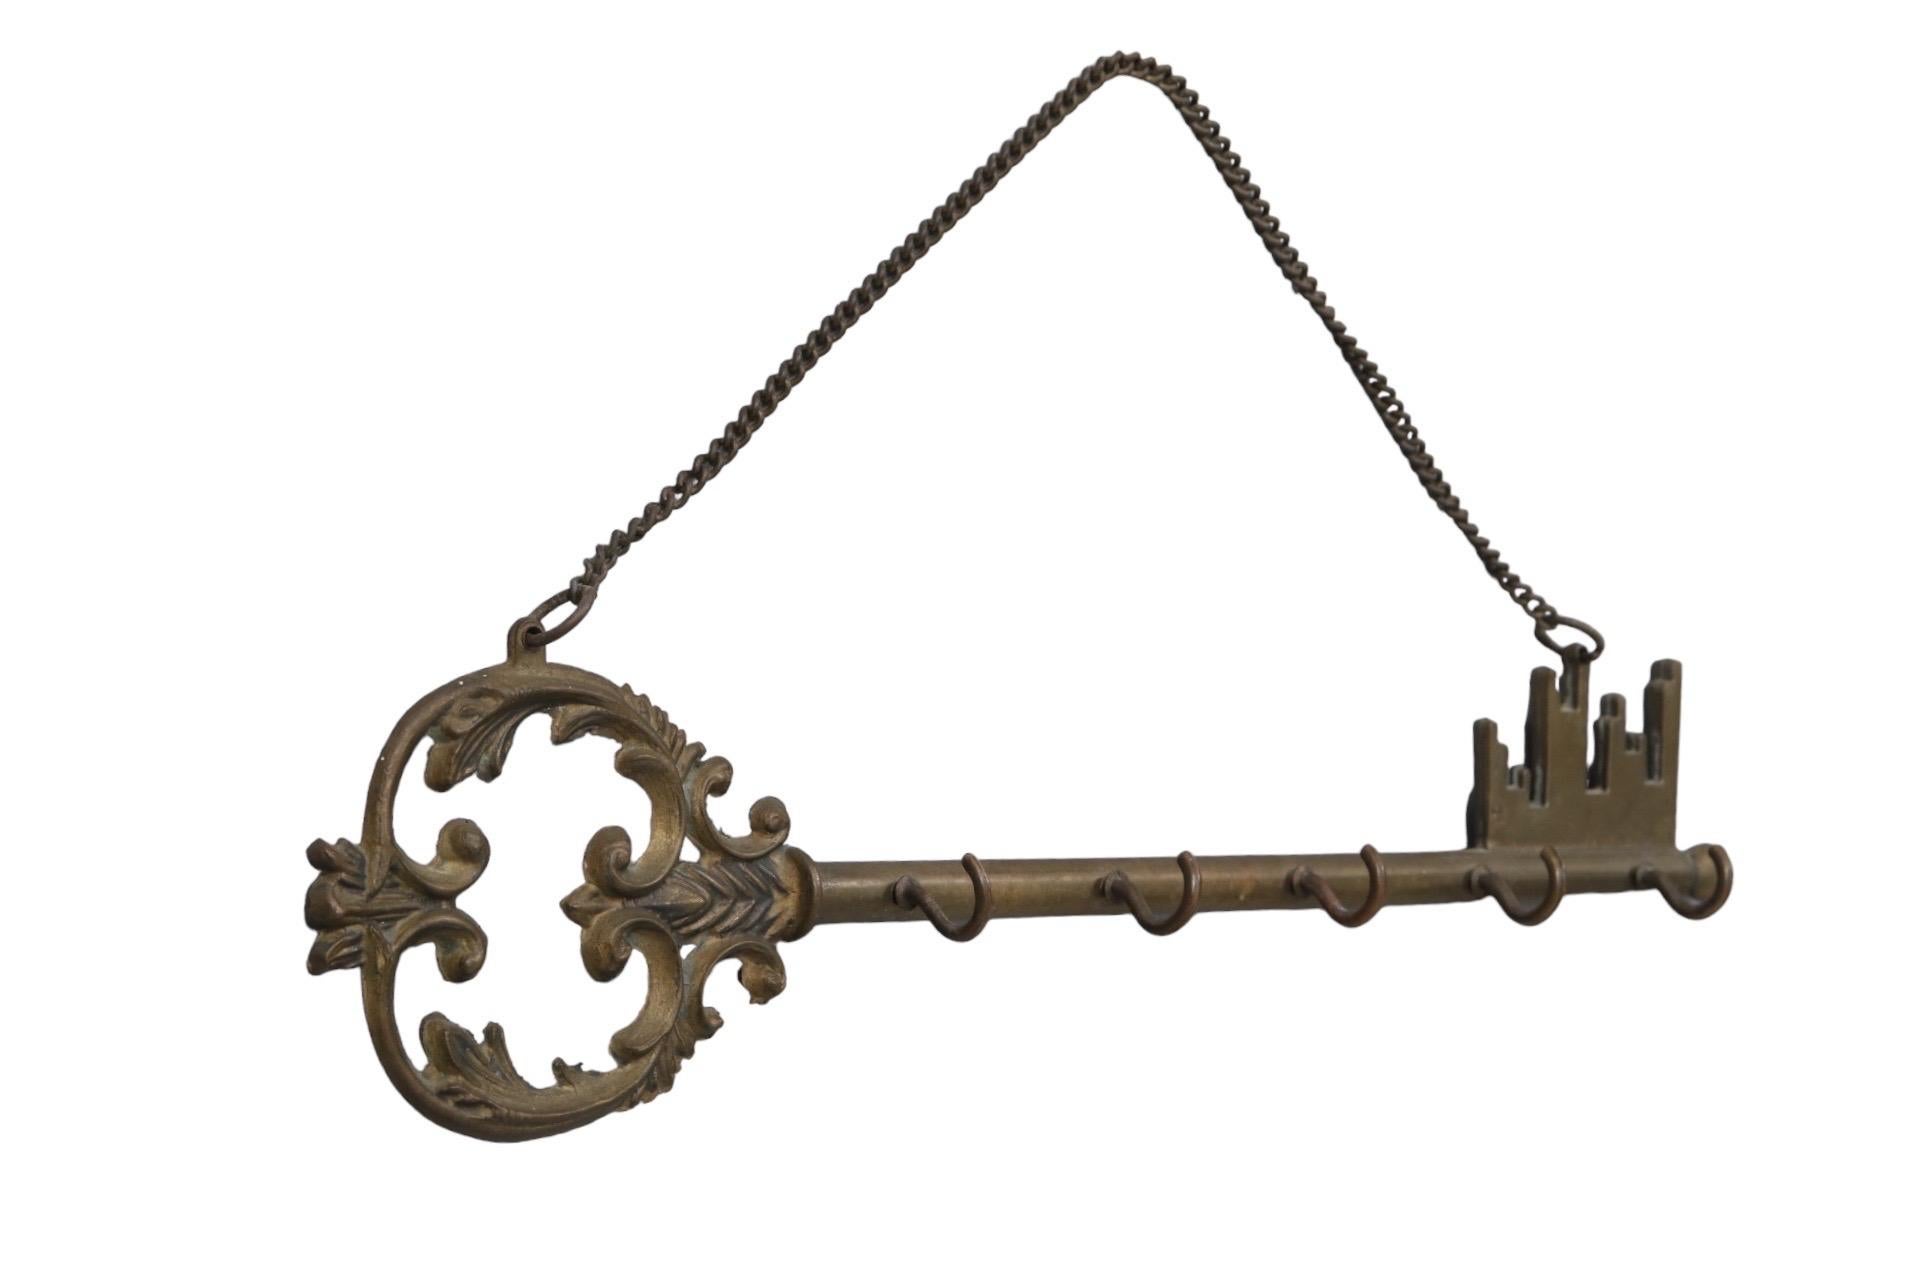 A large decorative brass key is cast with an acanthus scrolled bow and five small hooks on the stem. Hangs with a simple 12” chain.
  